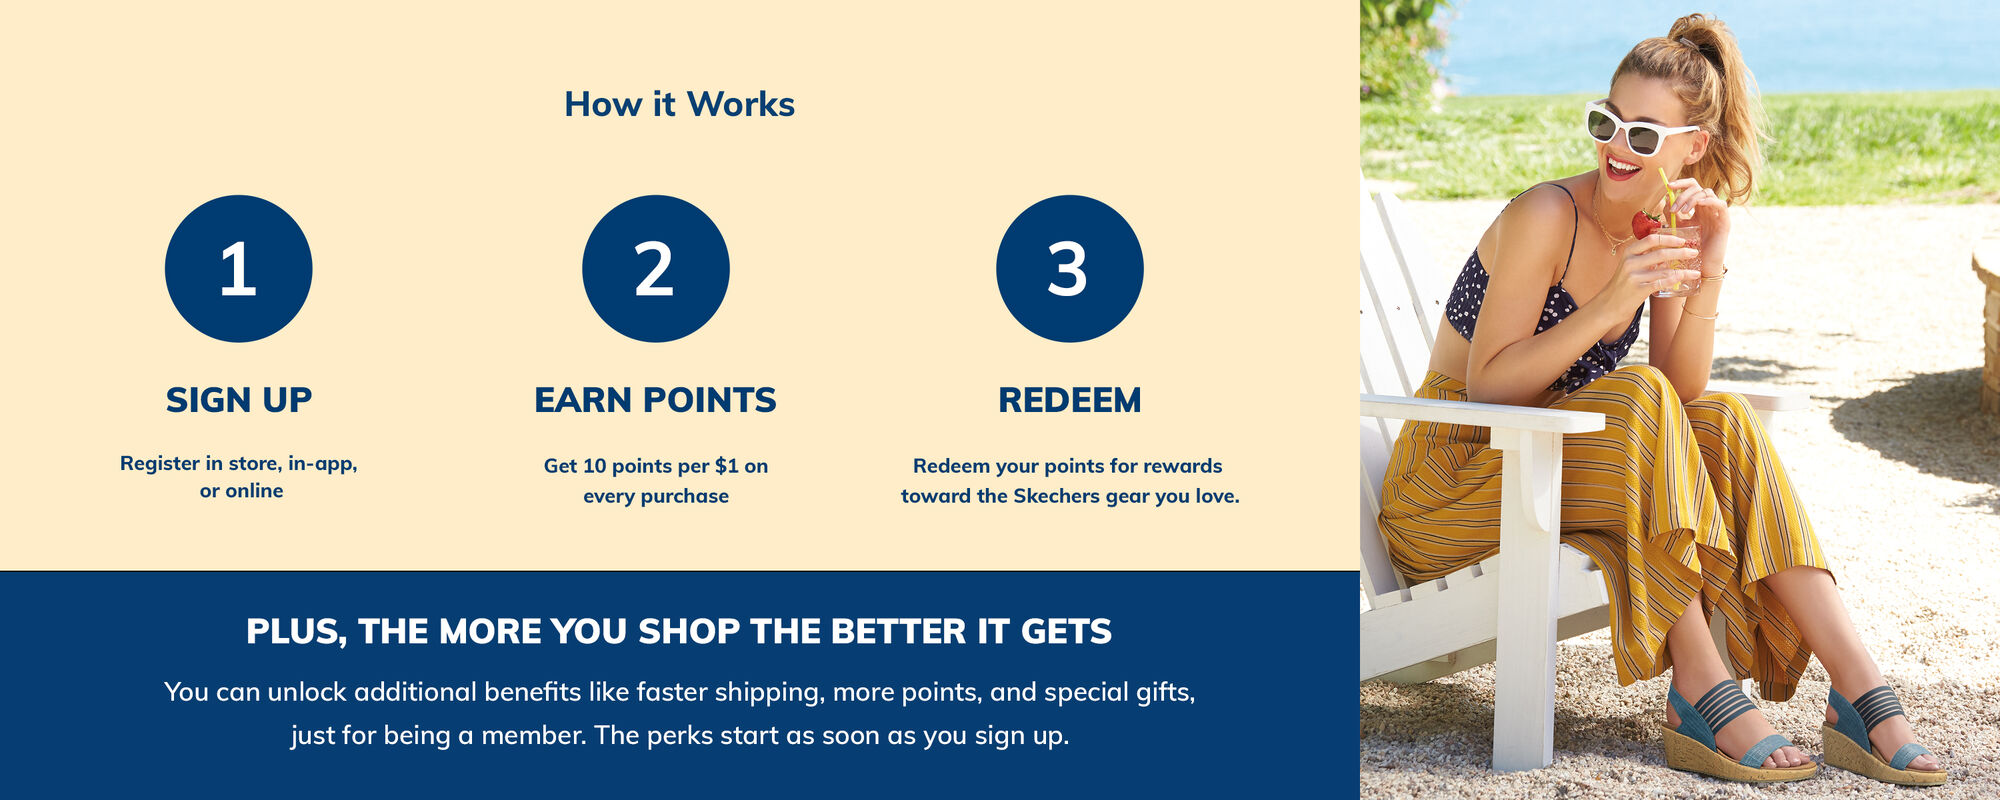 How to Use Skechers Rewards?